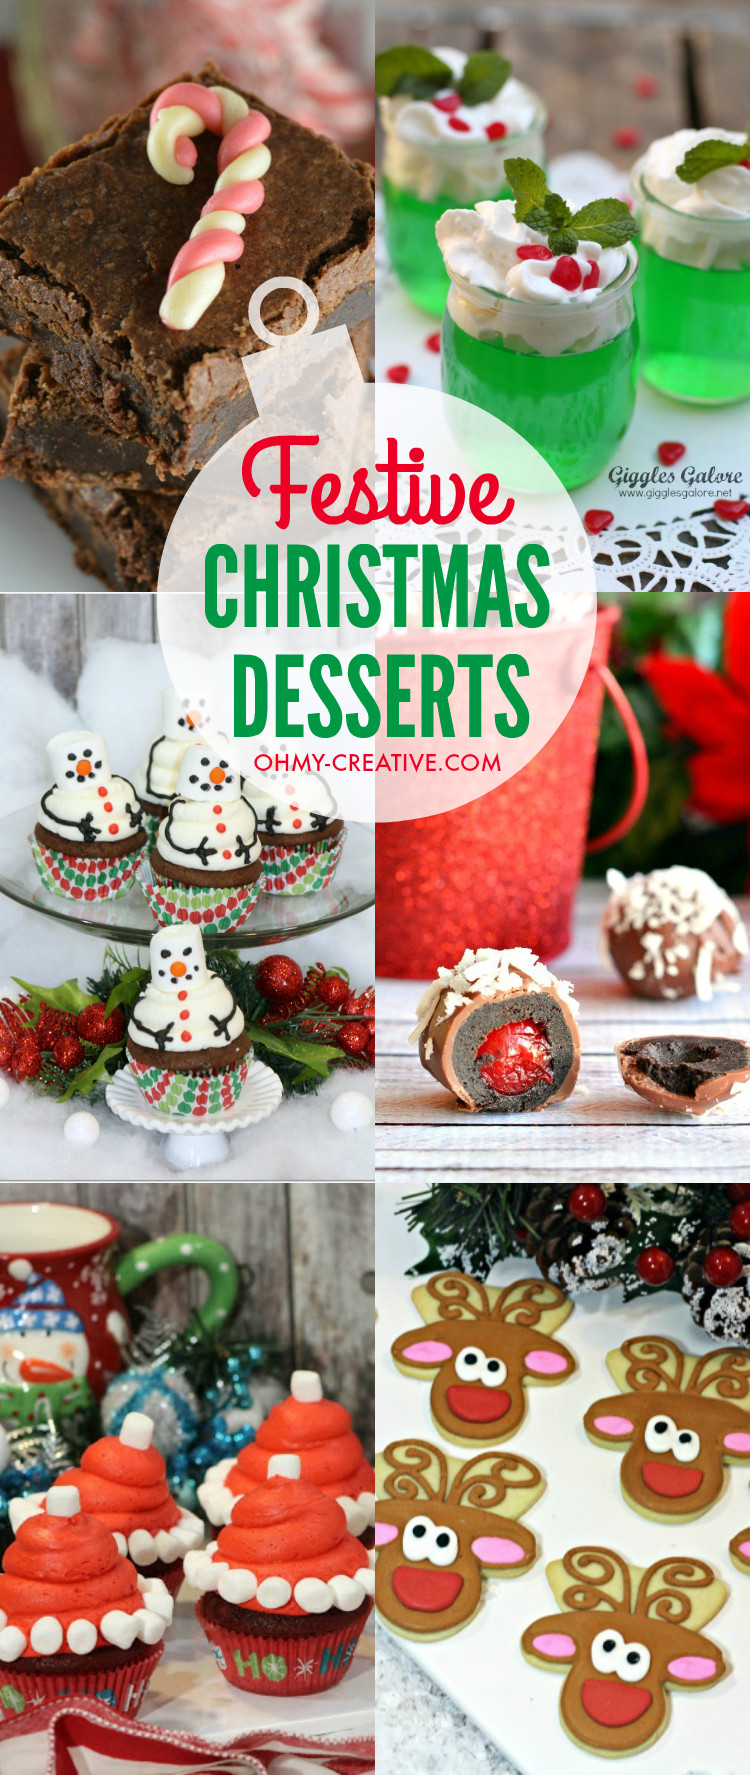 Children'S Christmas Party Food Ideas
 Festive Christmas Desserts Oh My Creative